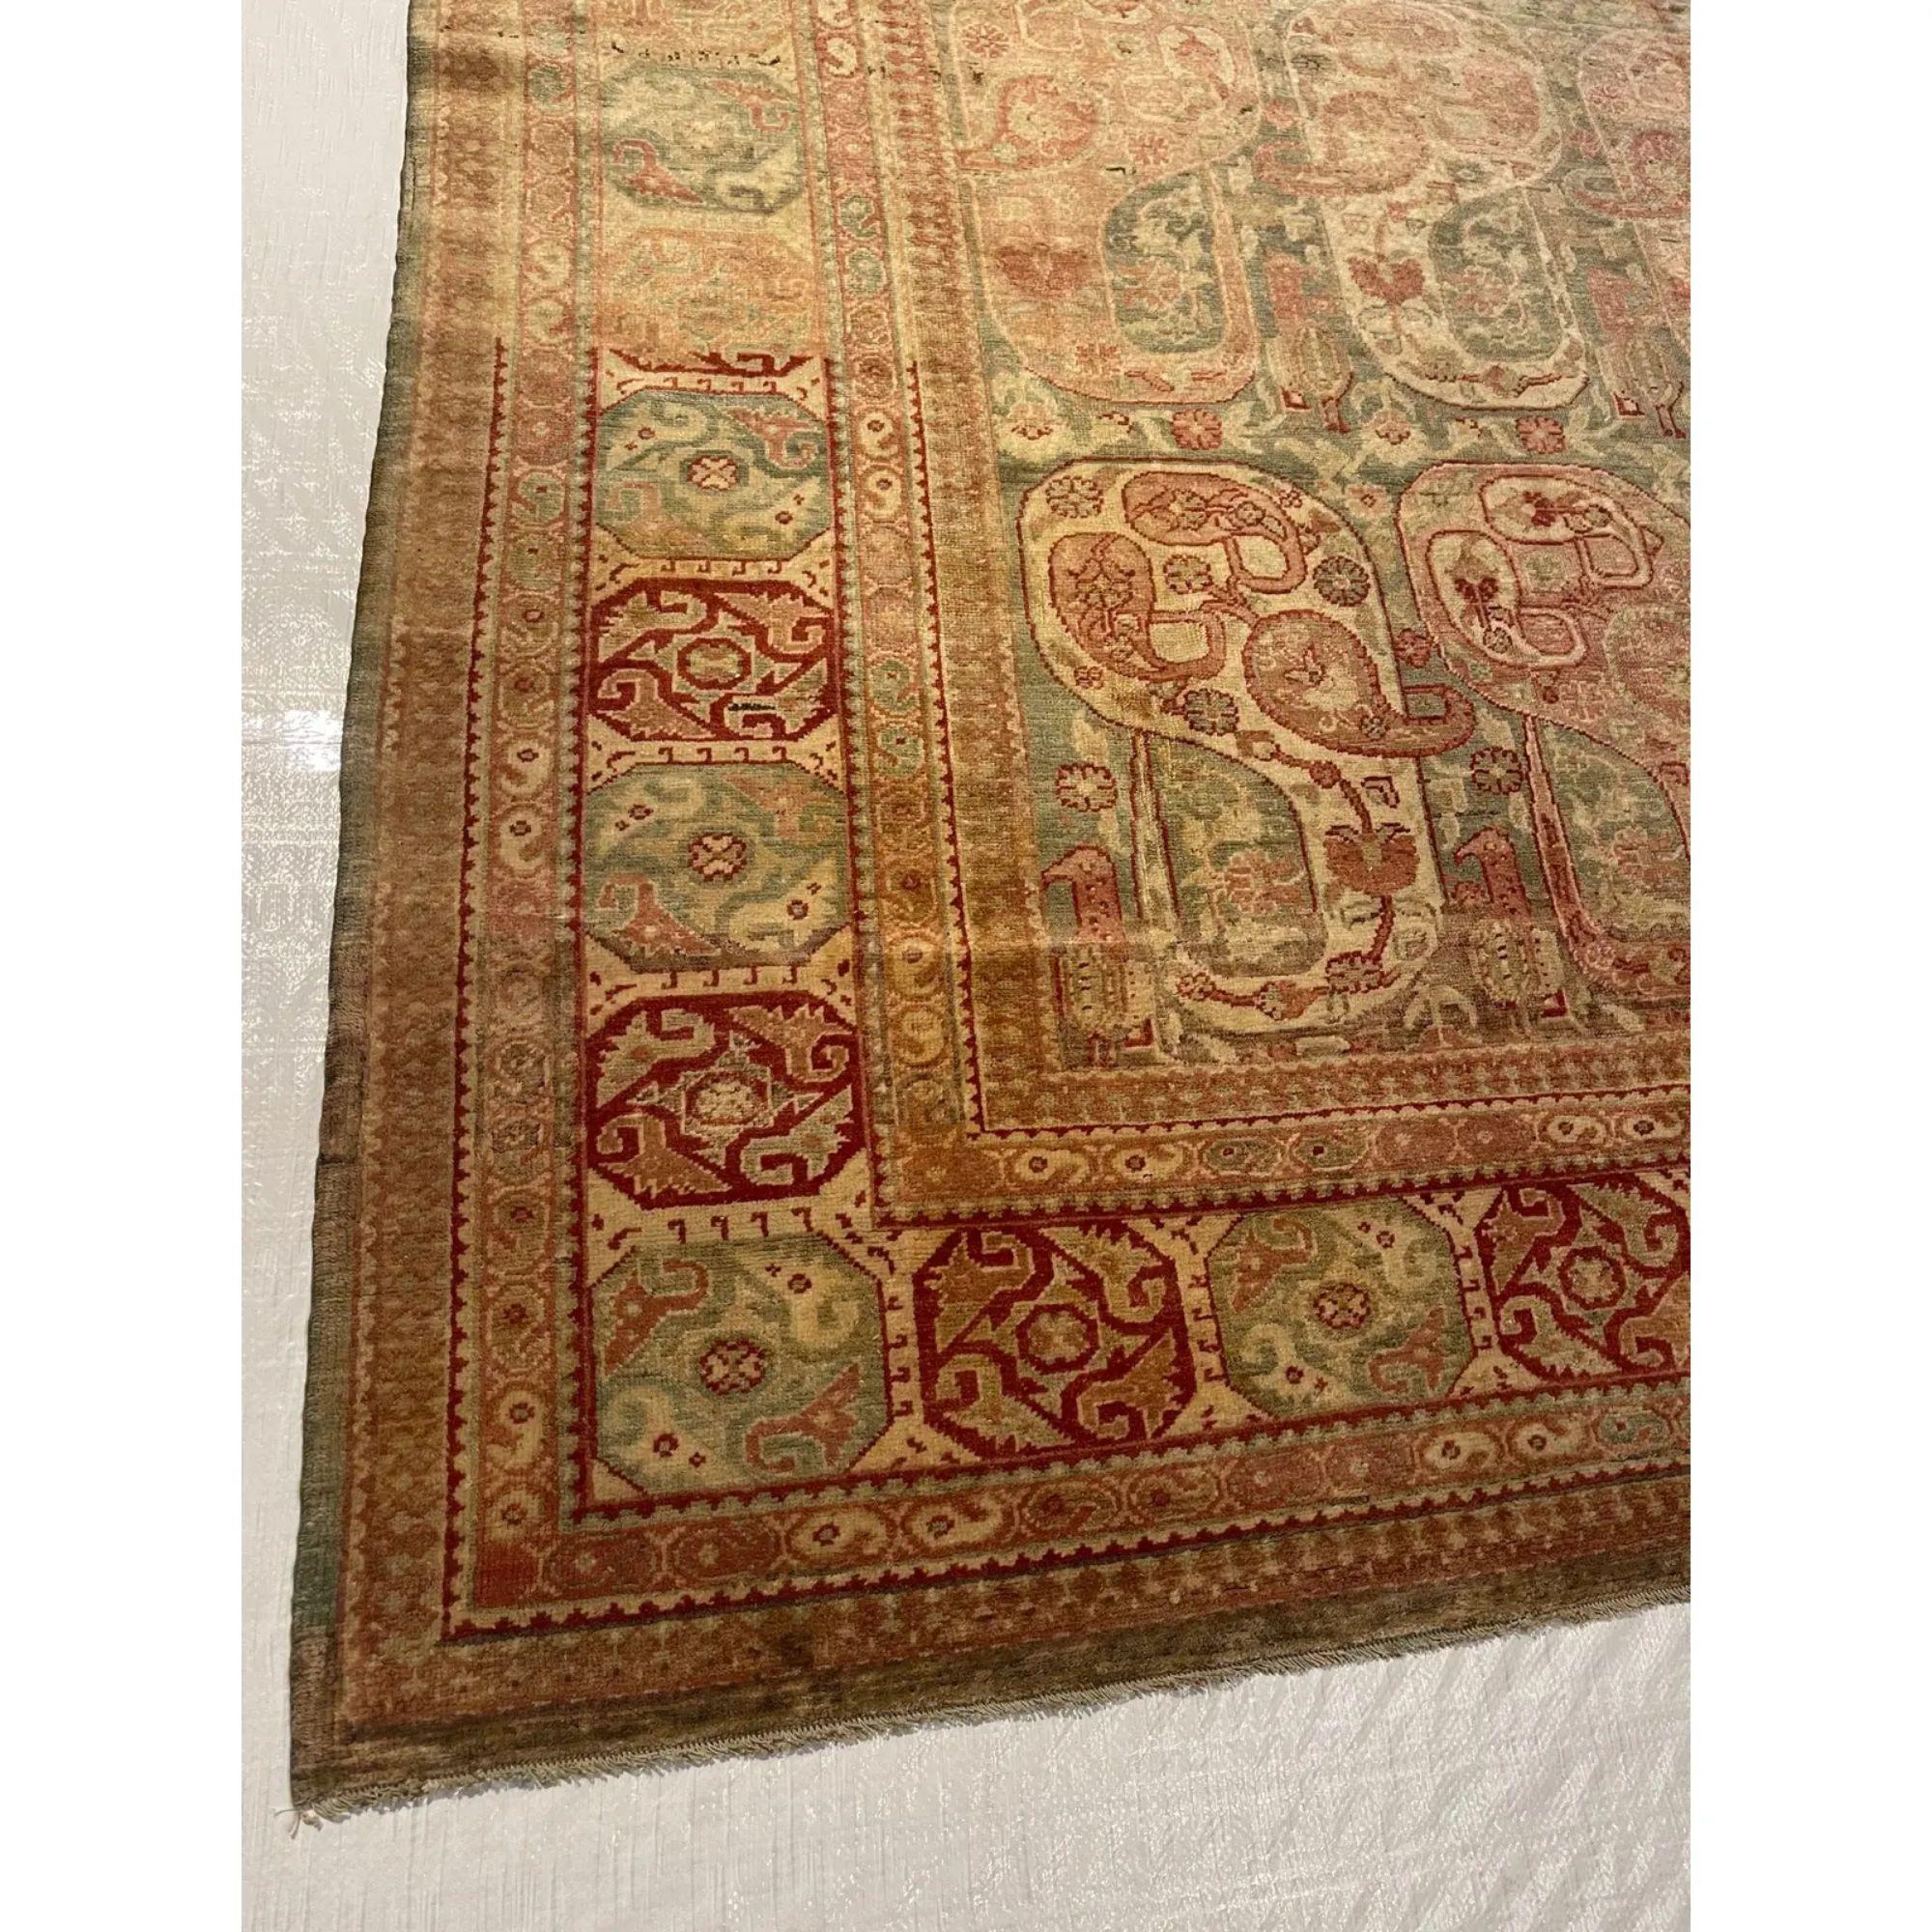 Antique Hereke Rugs – Hereke rugs represent the ultimate in finesse and delicacy within the antique Turkish rug production of the later nineteenth and early twentieth centuries. Inspired by the court carpets of Safavid Iran and Ottoman Turkey, the